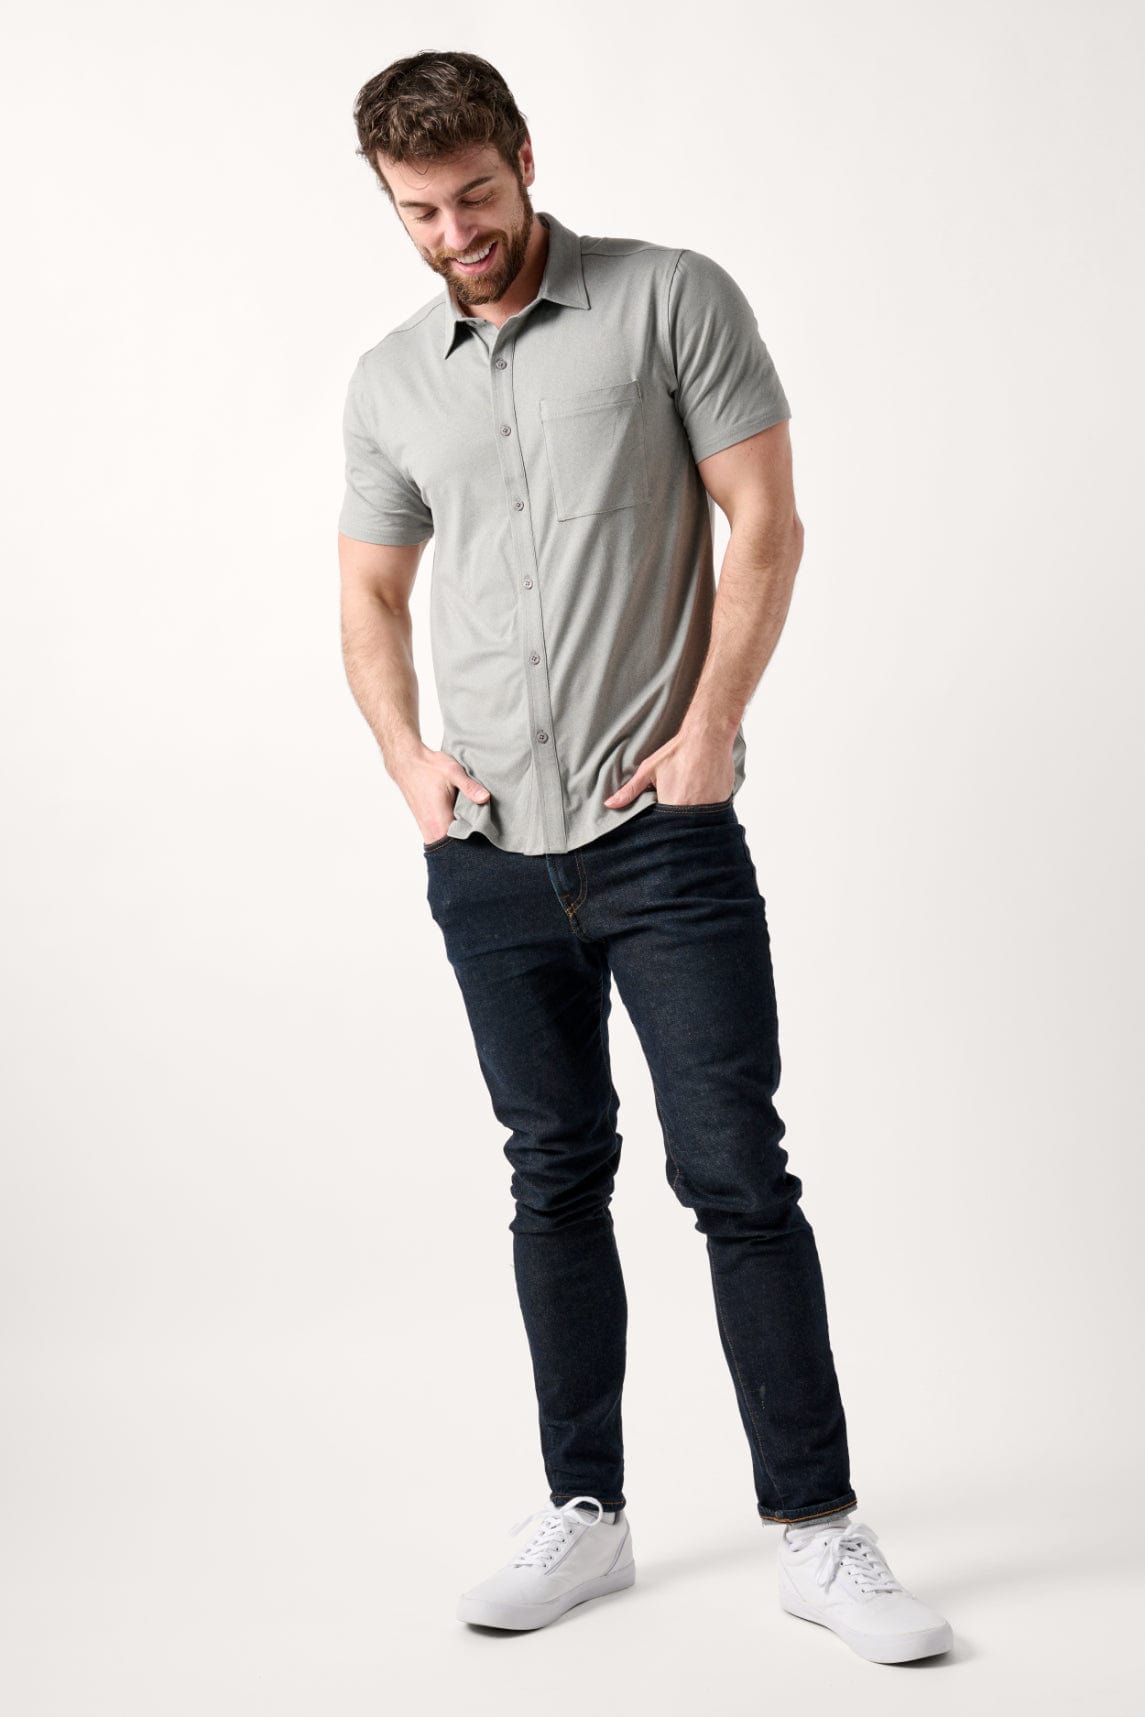 Male model dressed in casual style with the WEARFIRST All Day Performance Shirt in Gray Heather